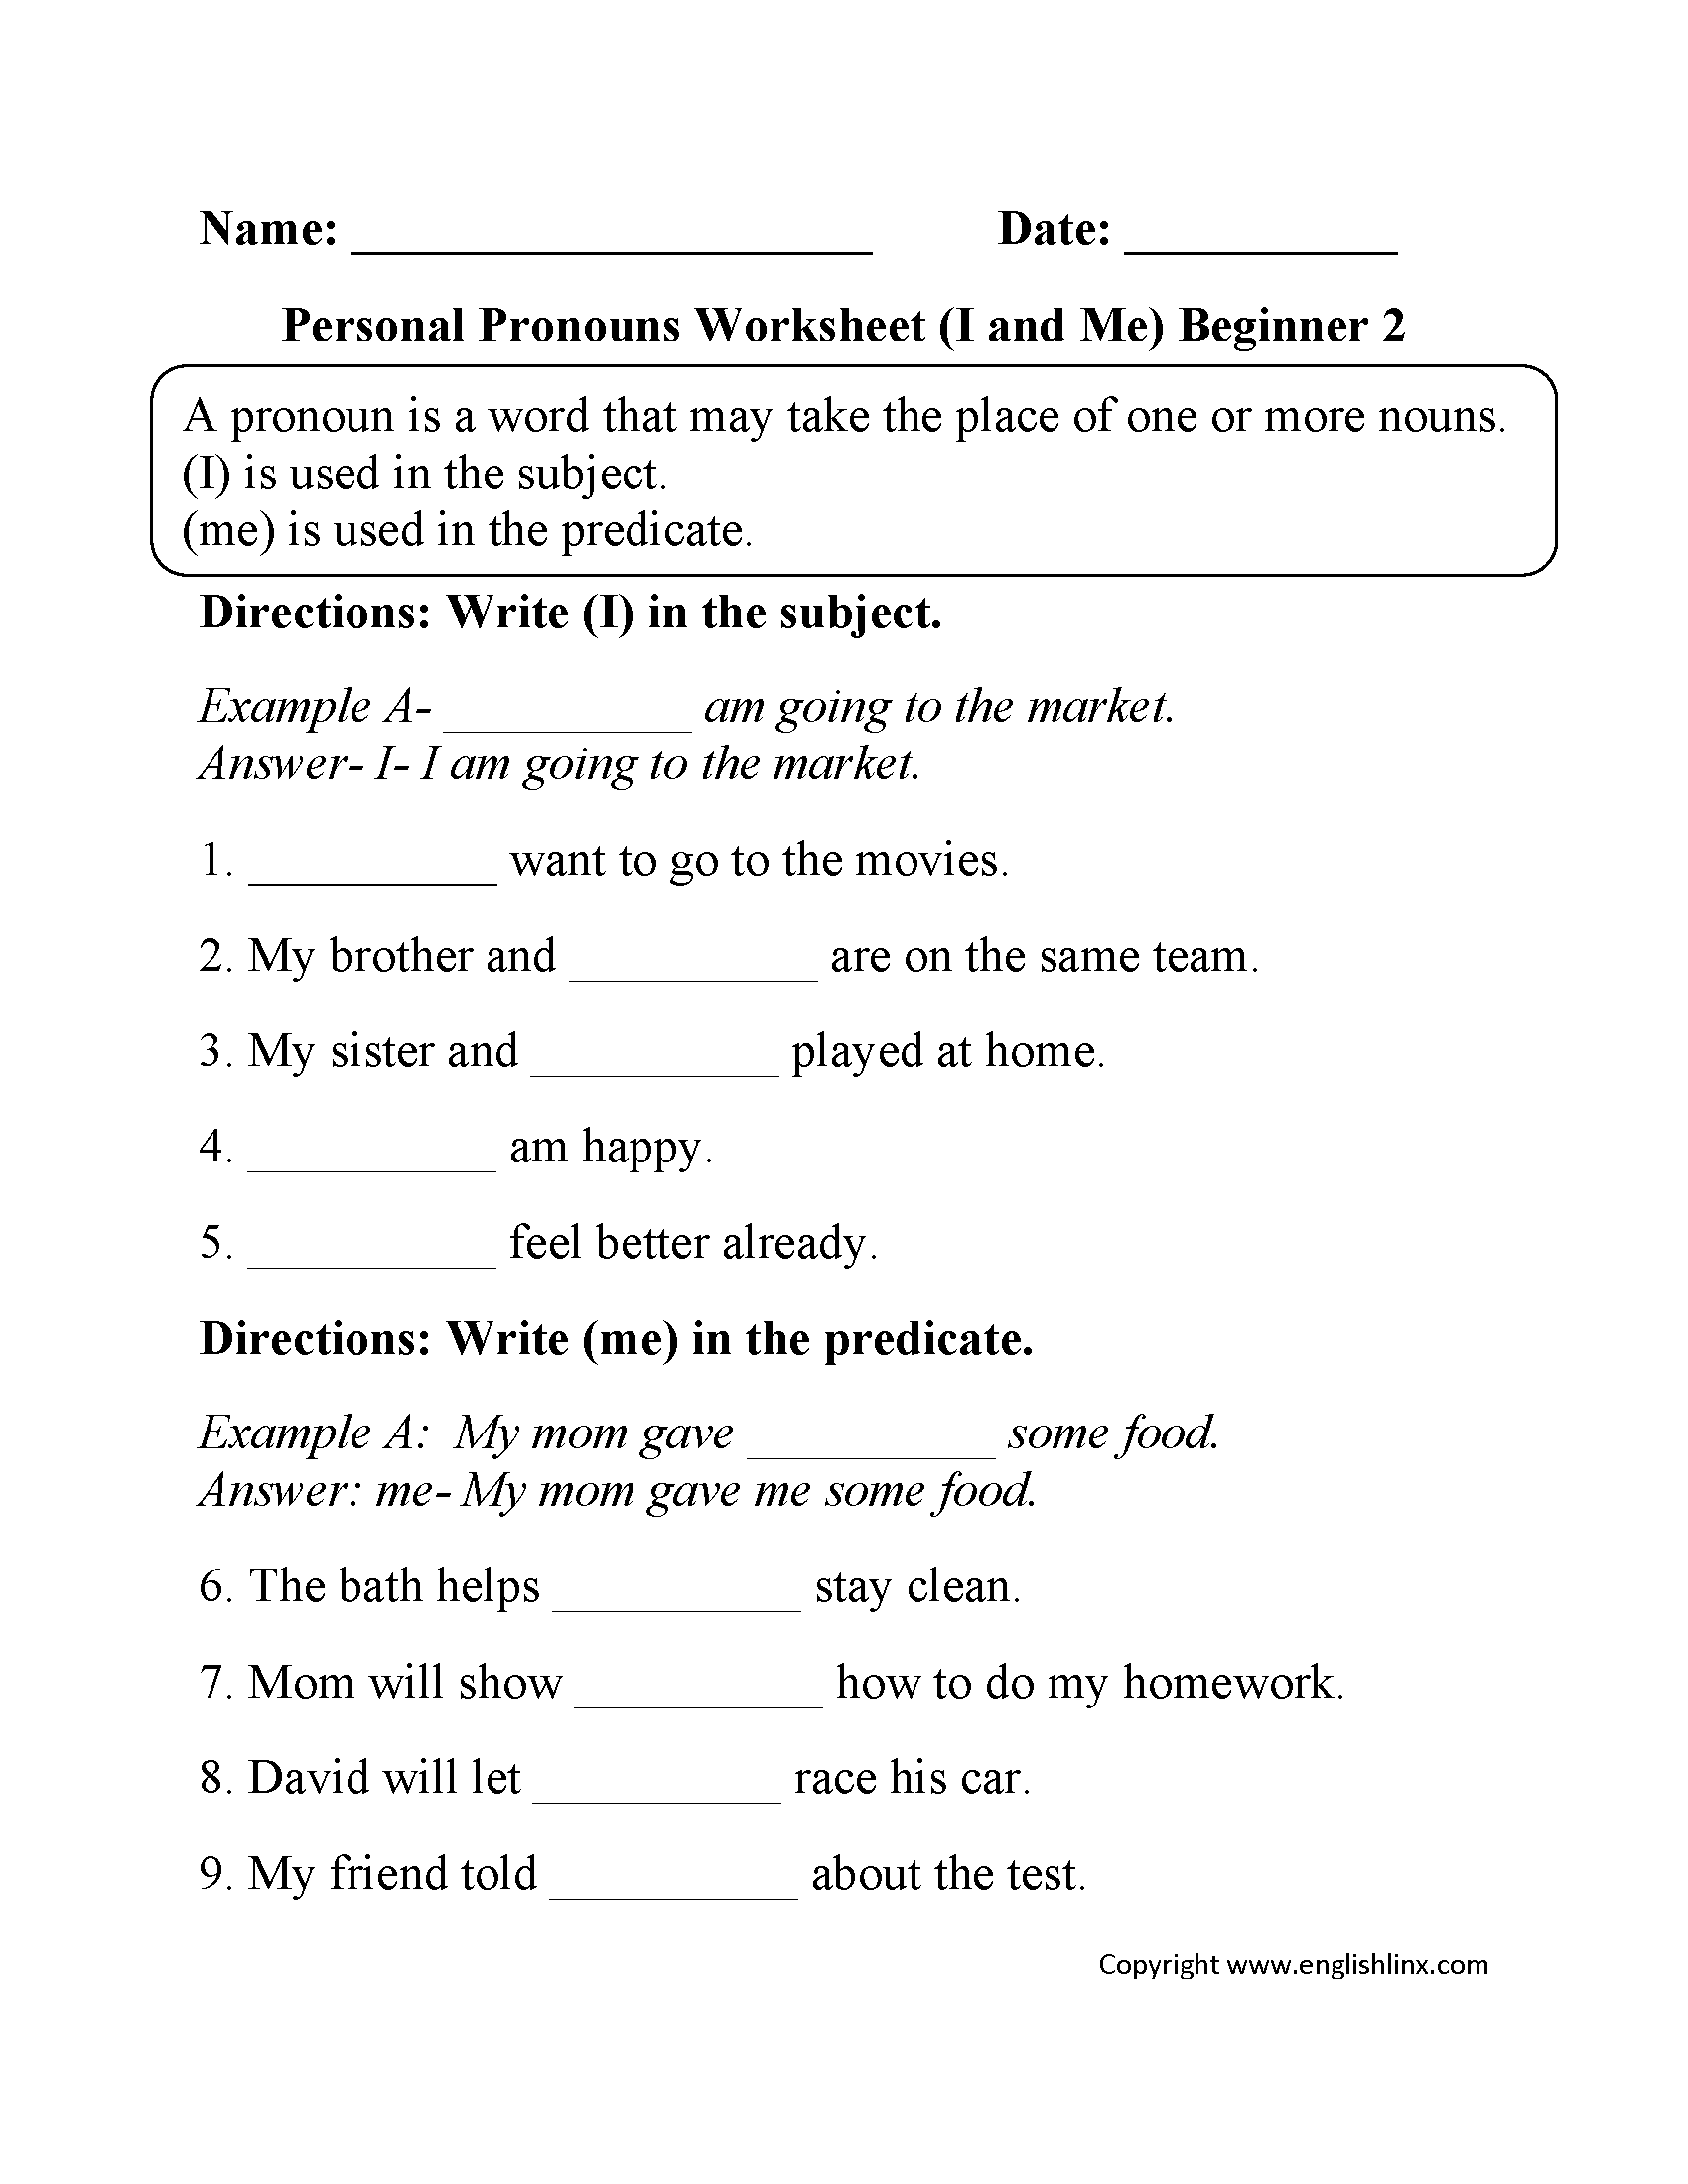 personal-pronouns-exercises-with-answers-pdf-exercisewalls